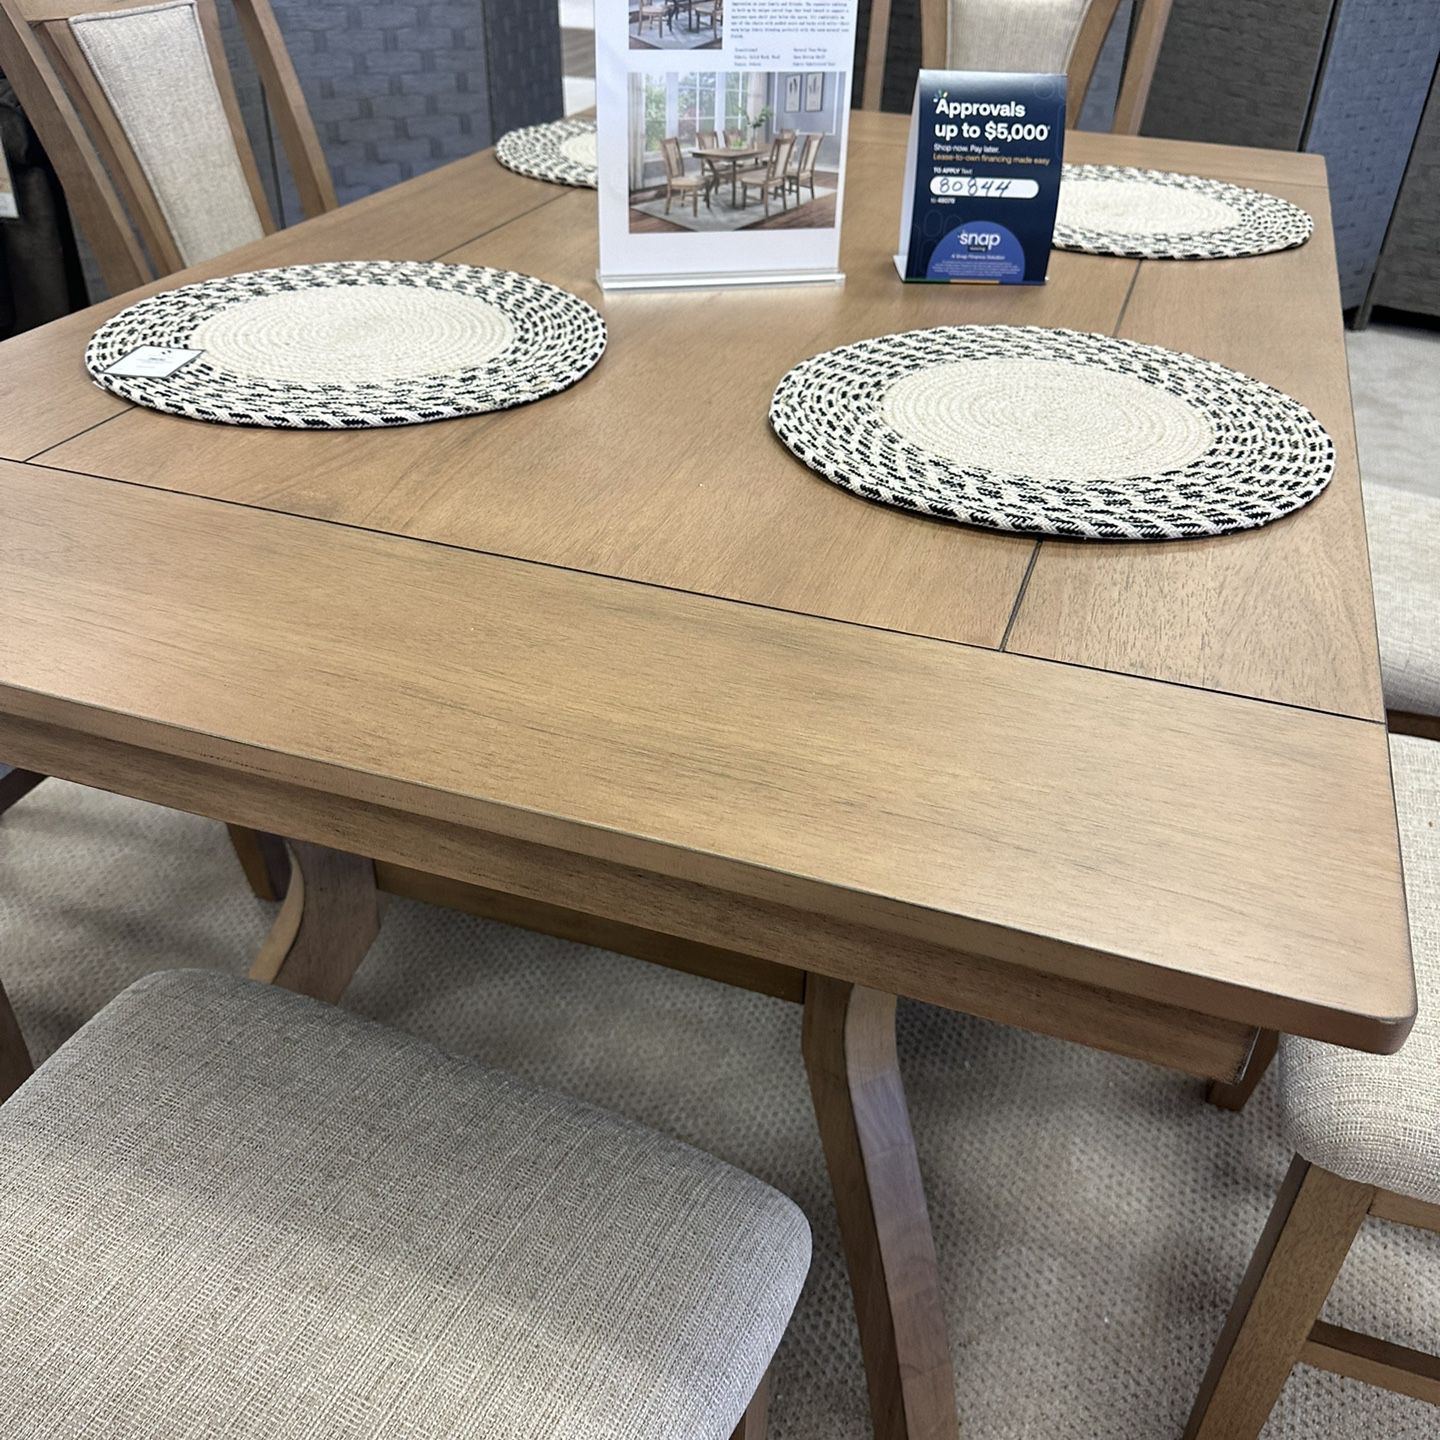 ✅ Dining Table, 6 People, Seating, Casual, Straightforward, Design, Unique Curved Legs Shelf Open beige fabric solid wood, natural tone(in Store Item